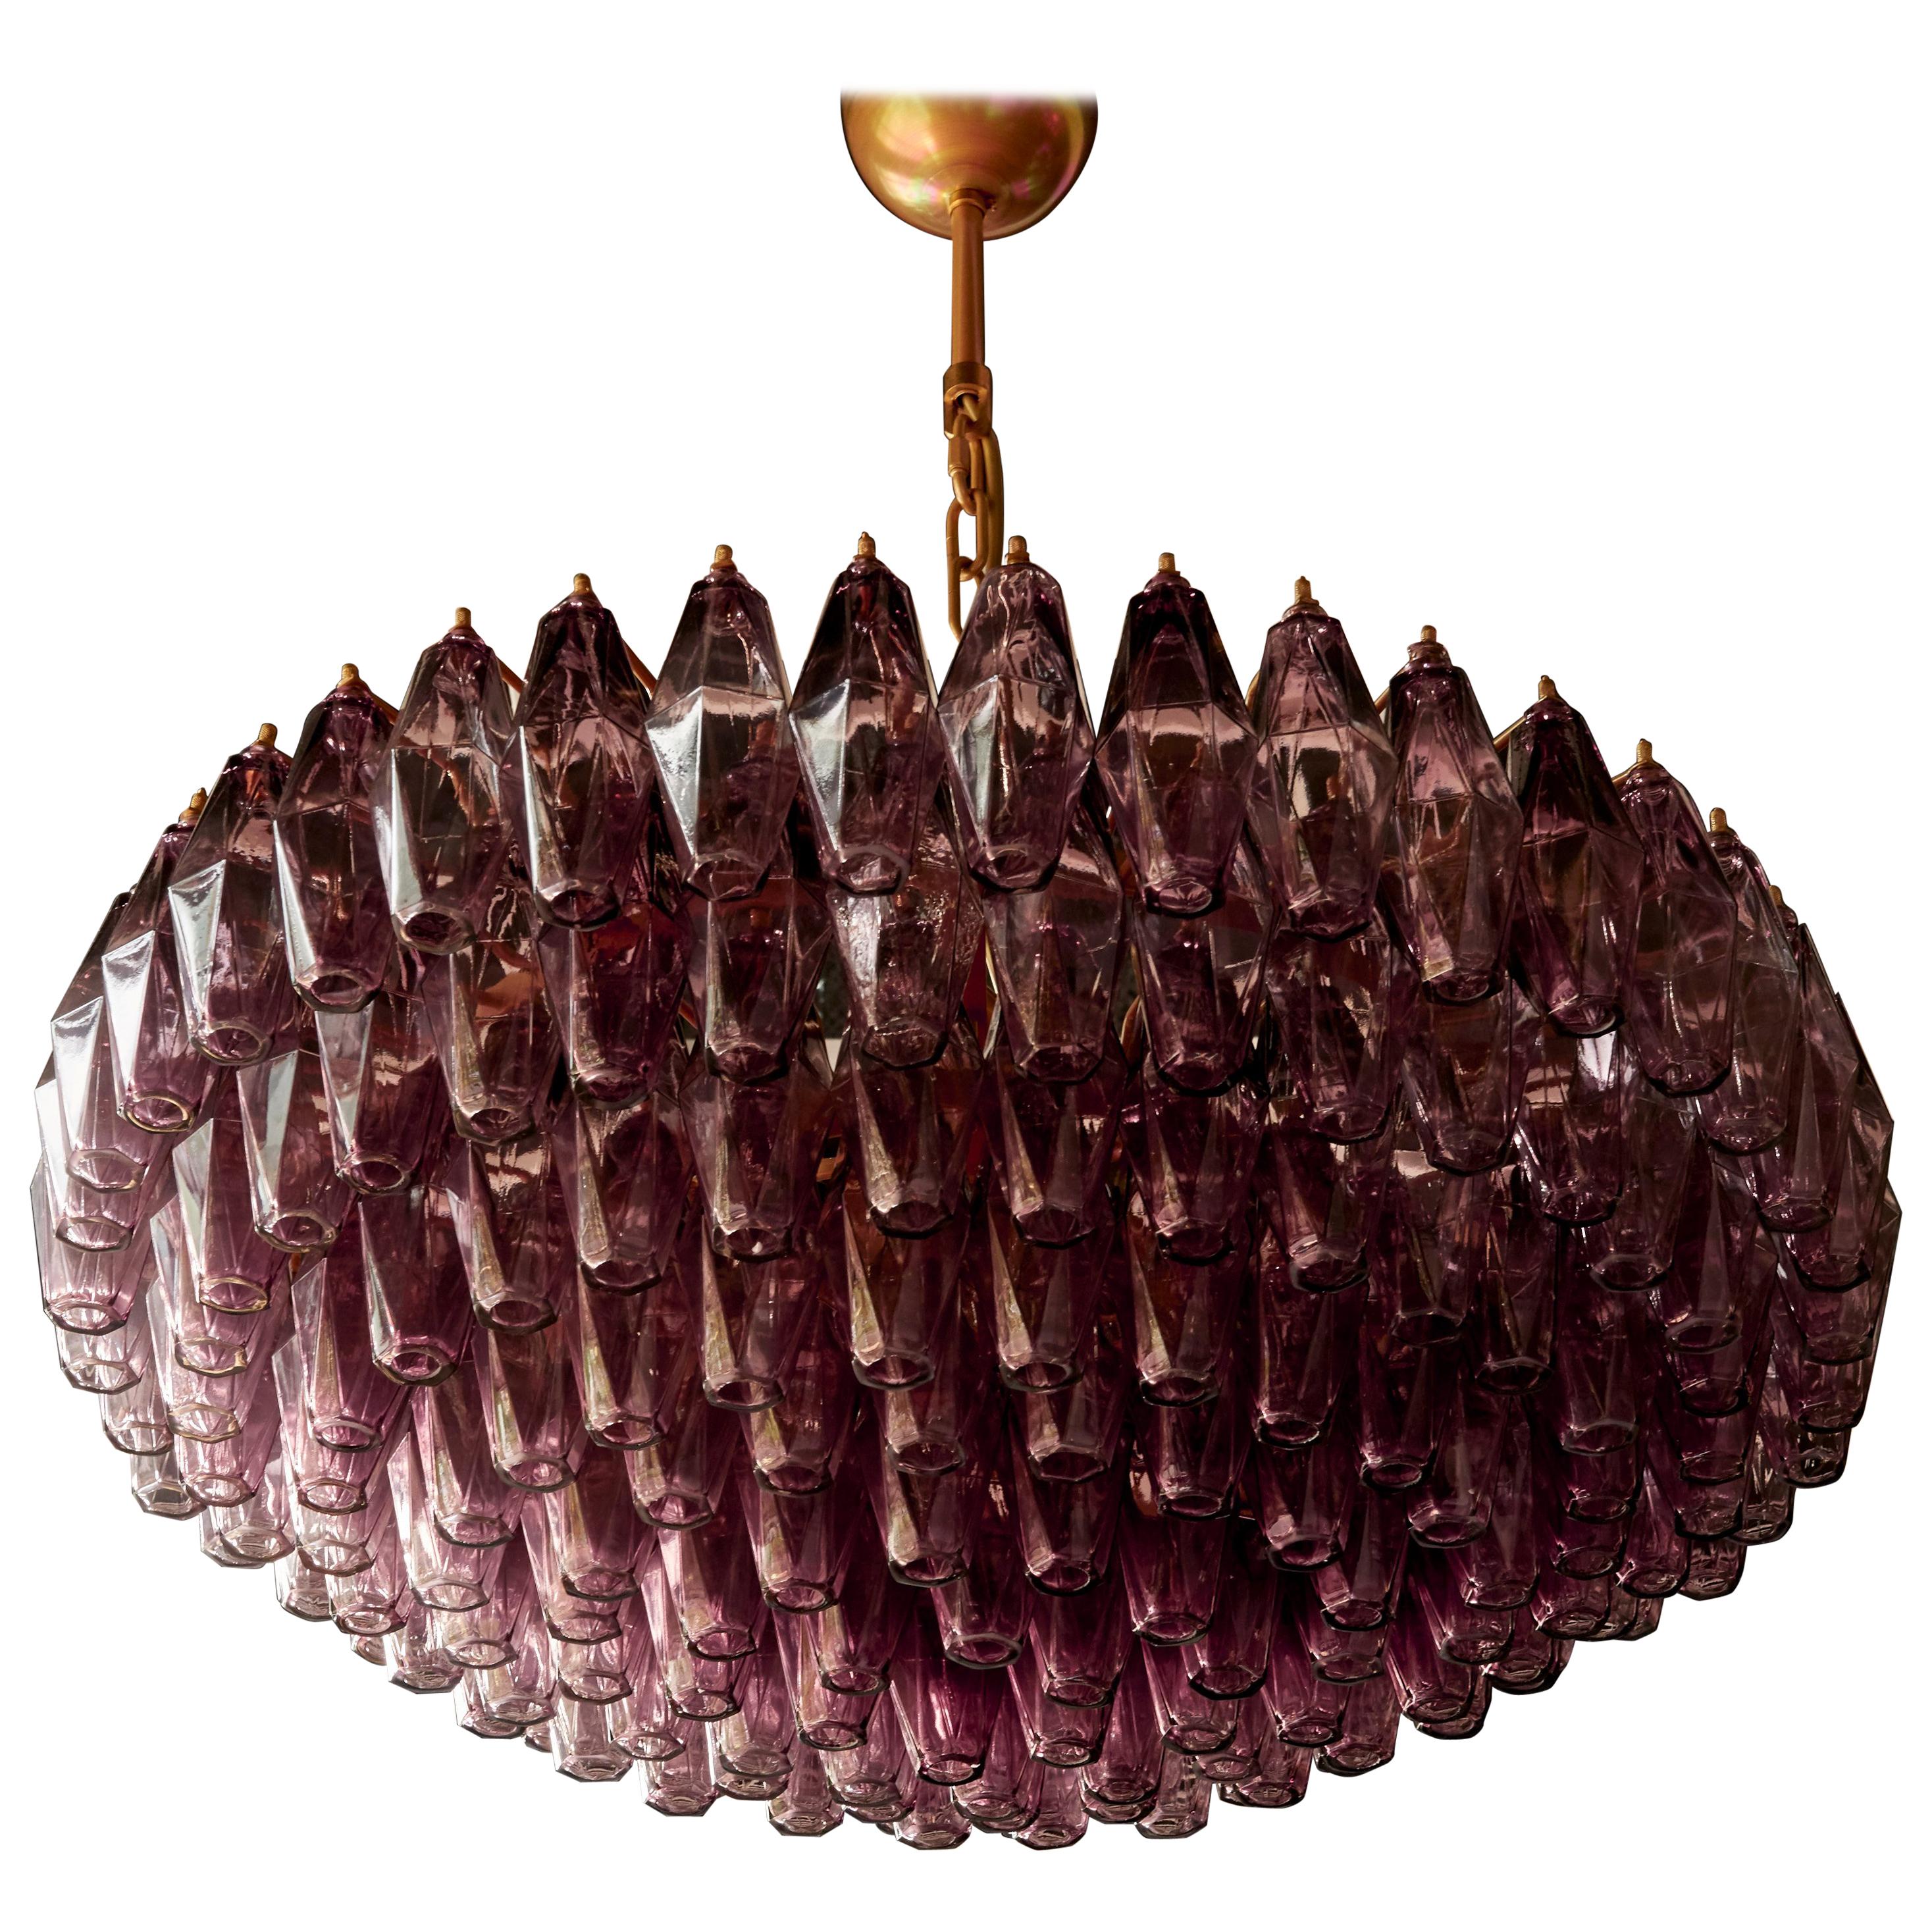 Very Huge Amethyst Polyhedral Murano Glass Chandelier